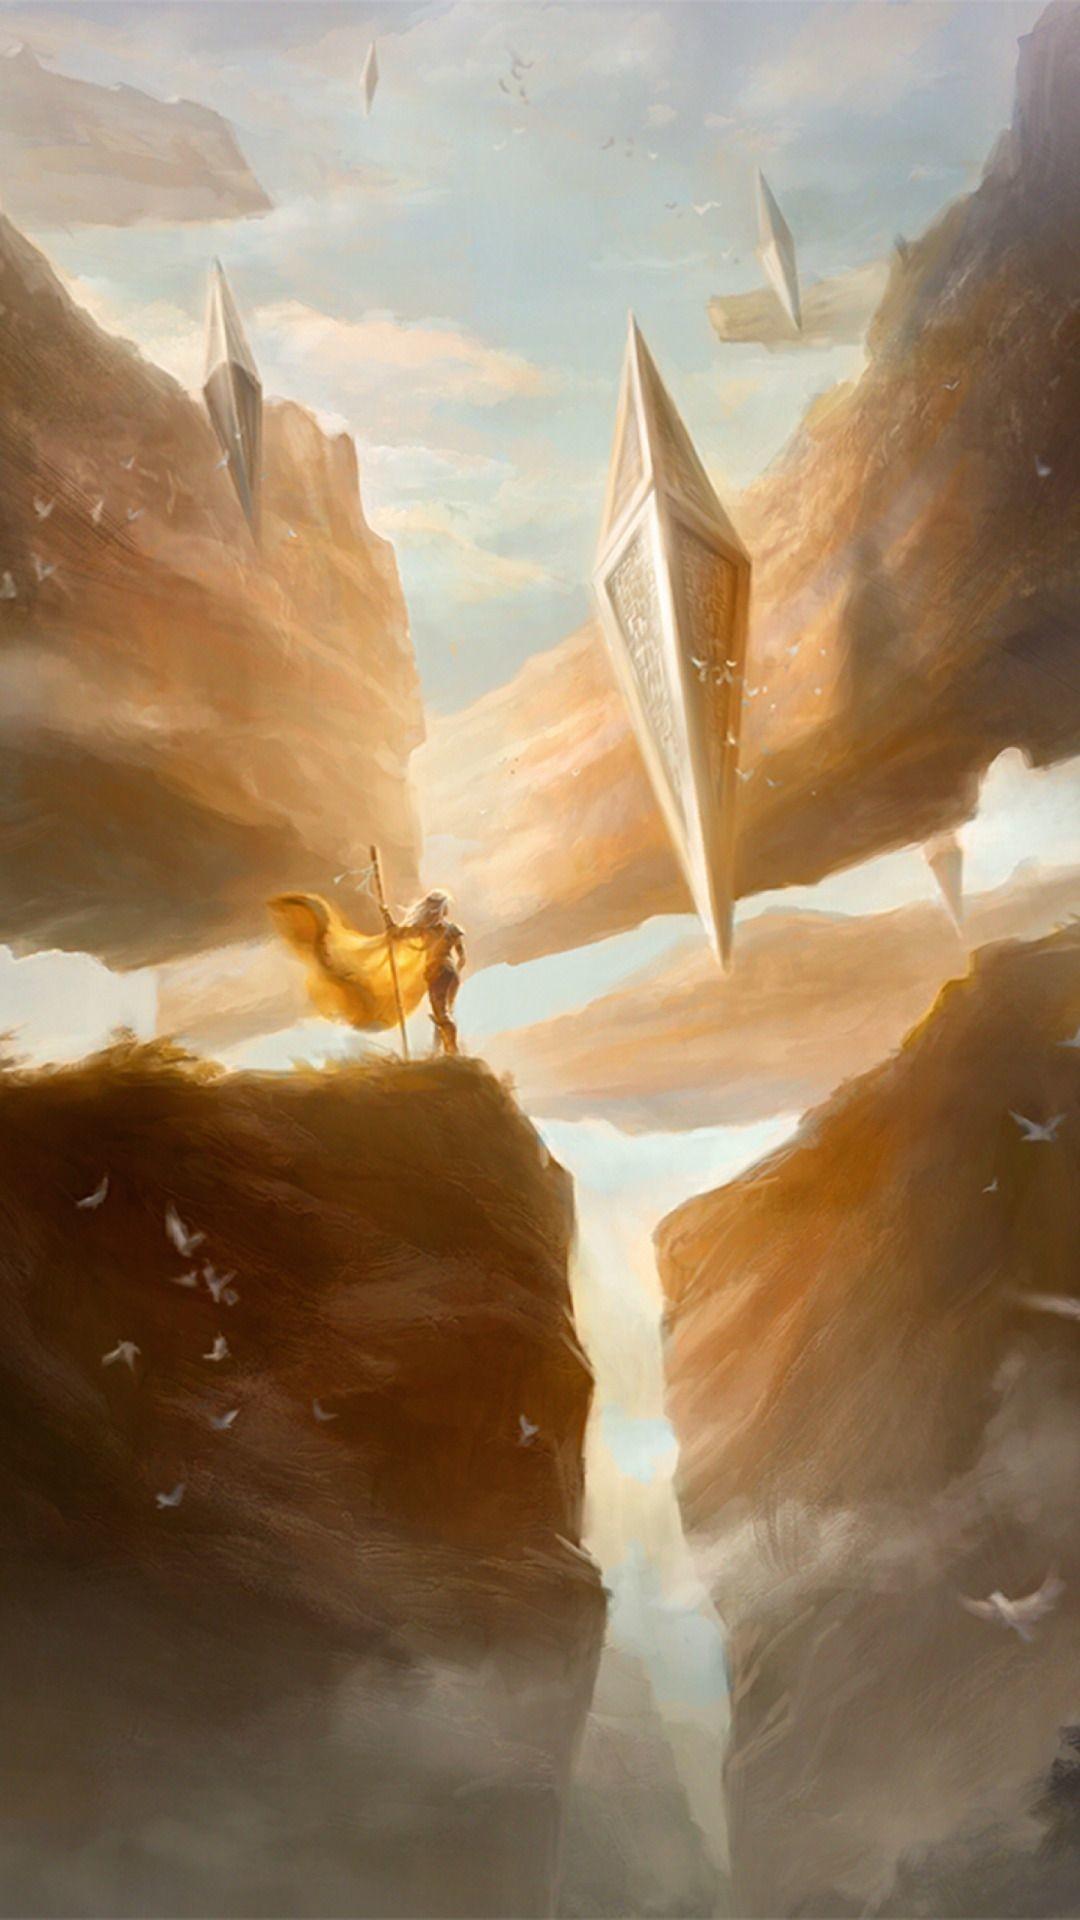 Magic The Gathering Iphone Wallpapers Wallpaper Cave